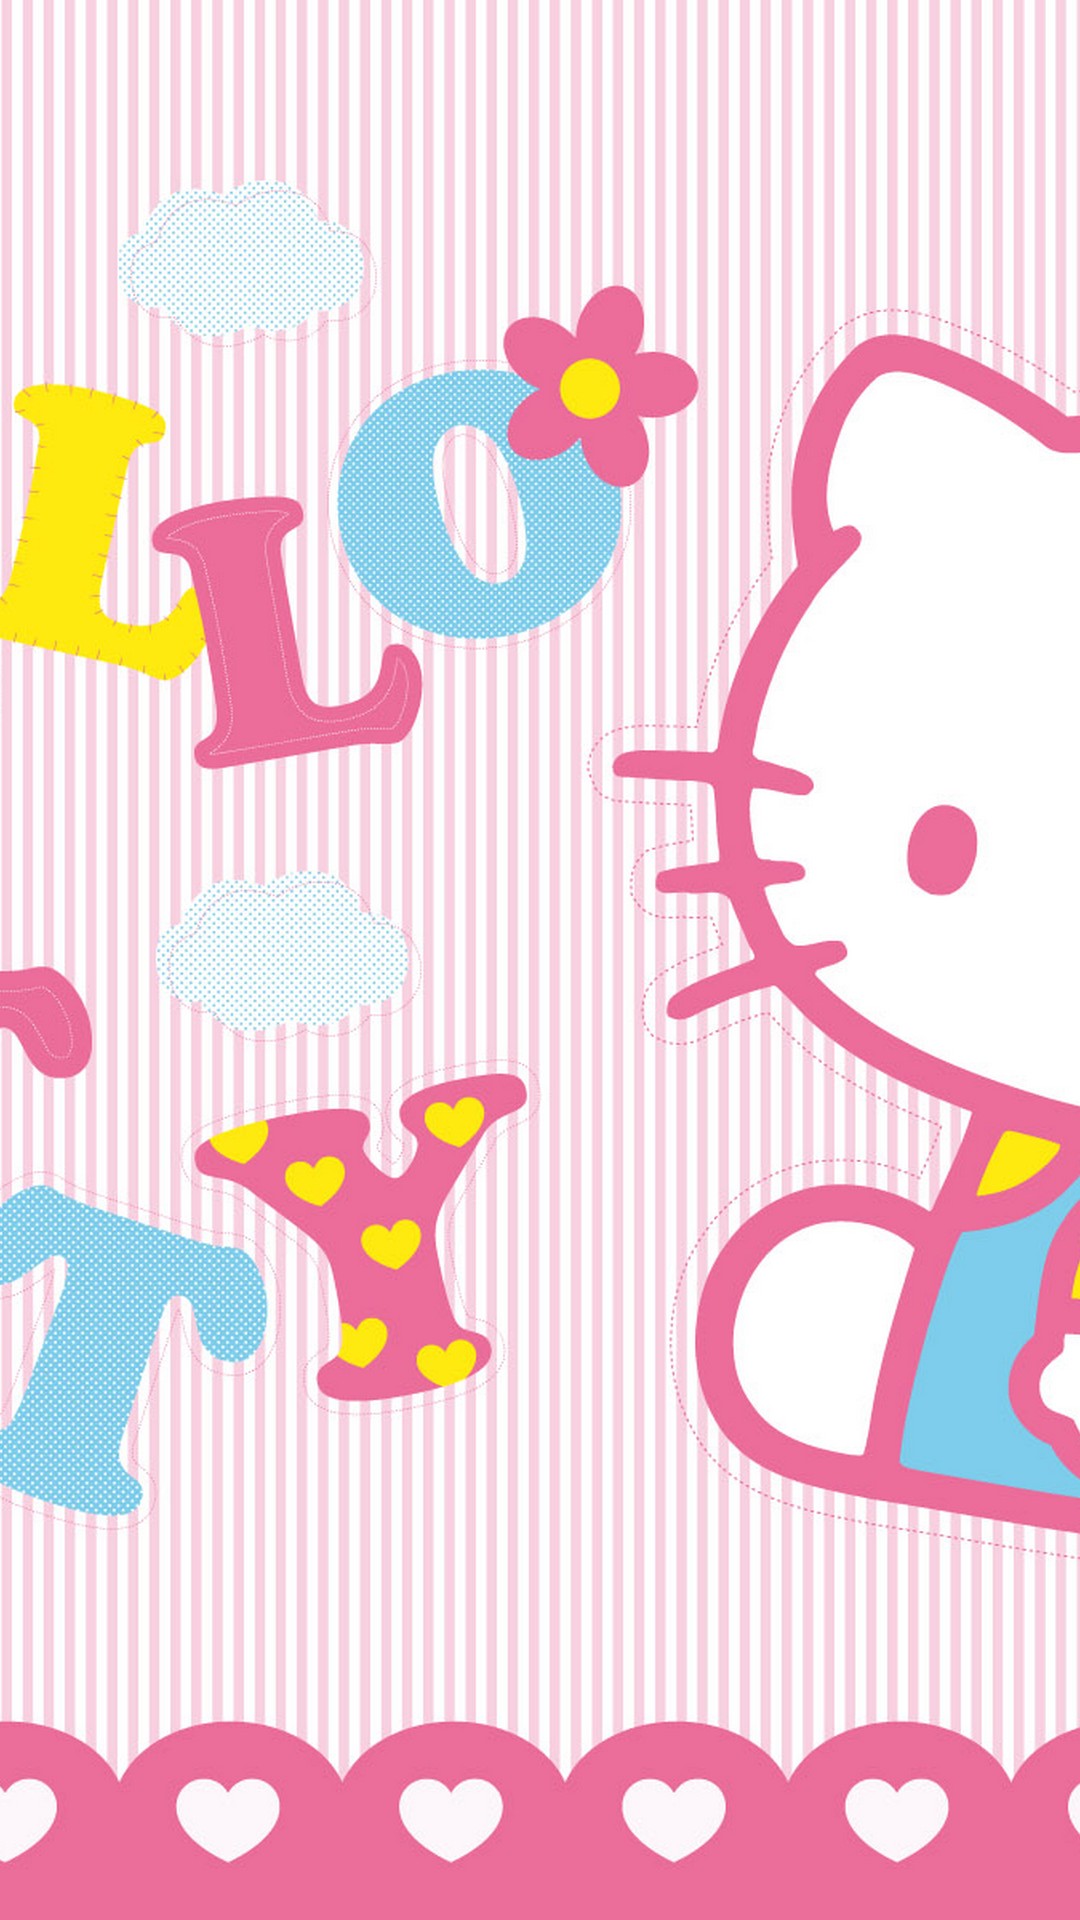 Sanrio Hello Kitty Wallpaper iPhone HD with image resolution 1080x1920 pixel. You can use this wallpaper as background for your desktop Computer Screensavers, Android or iPhone smartphones